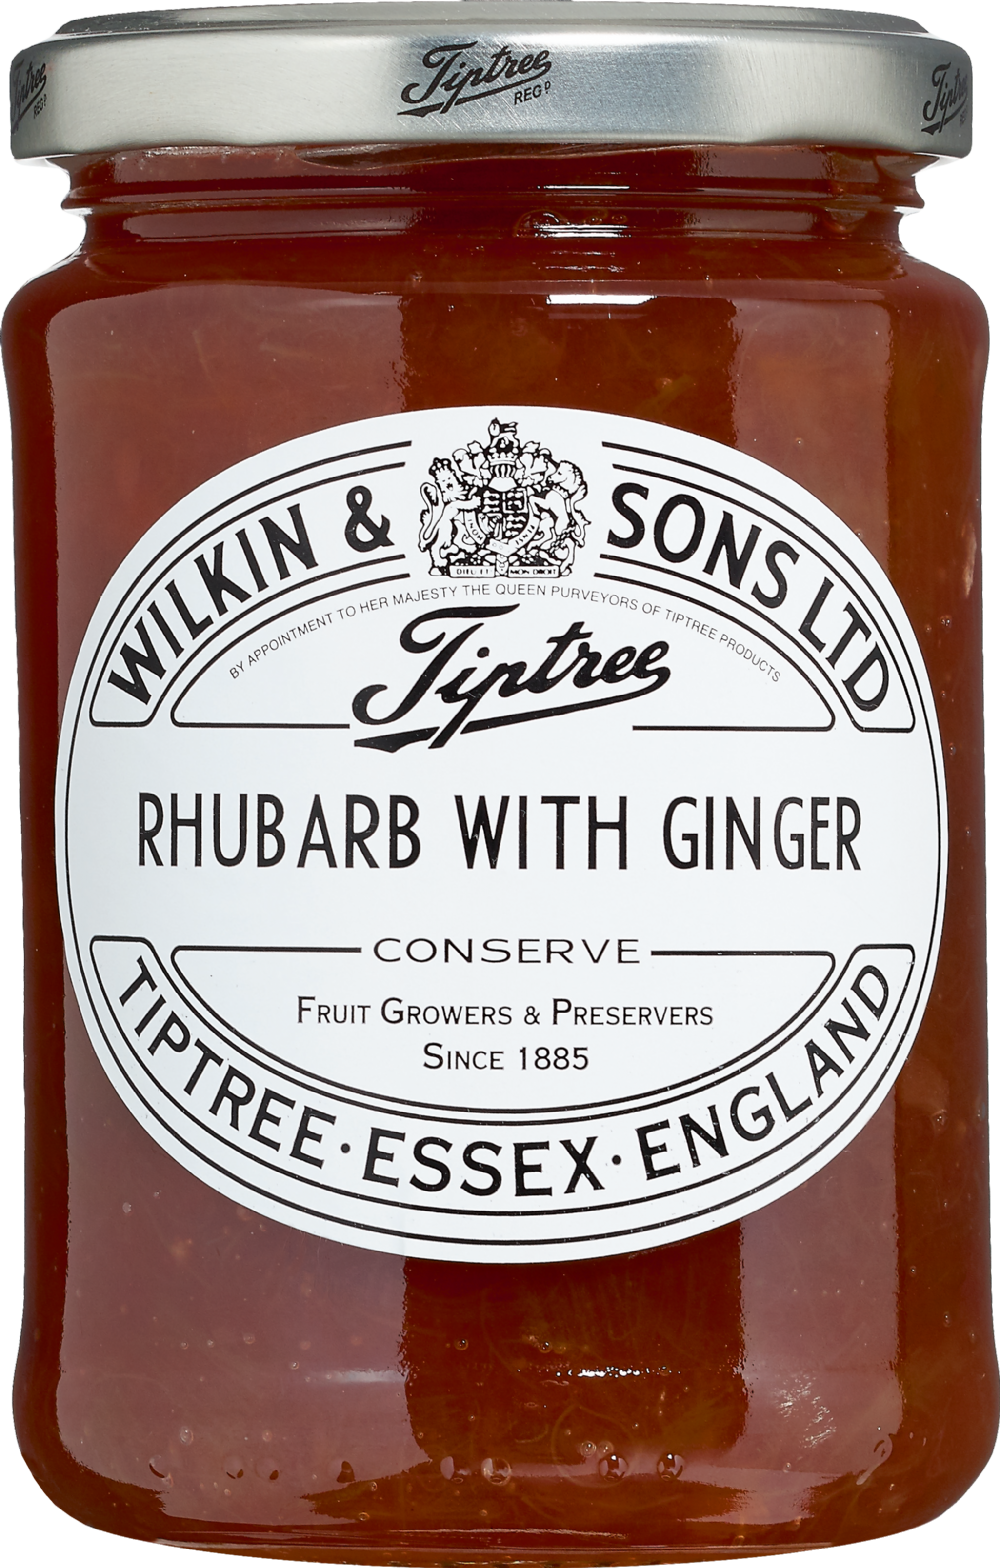 TIPTREE Rhubarb with Ginger Conserve 340g